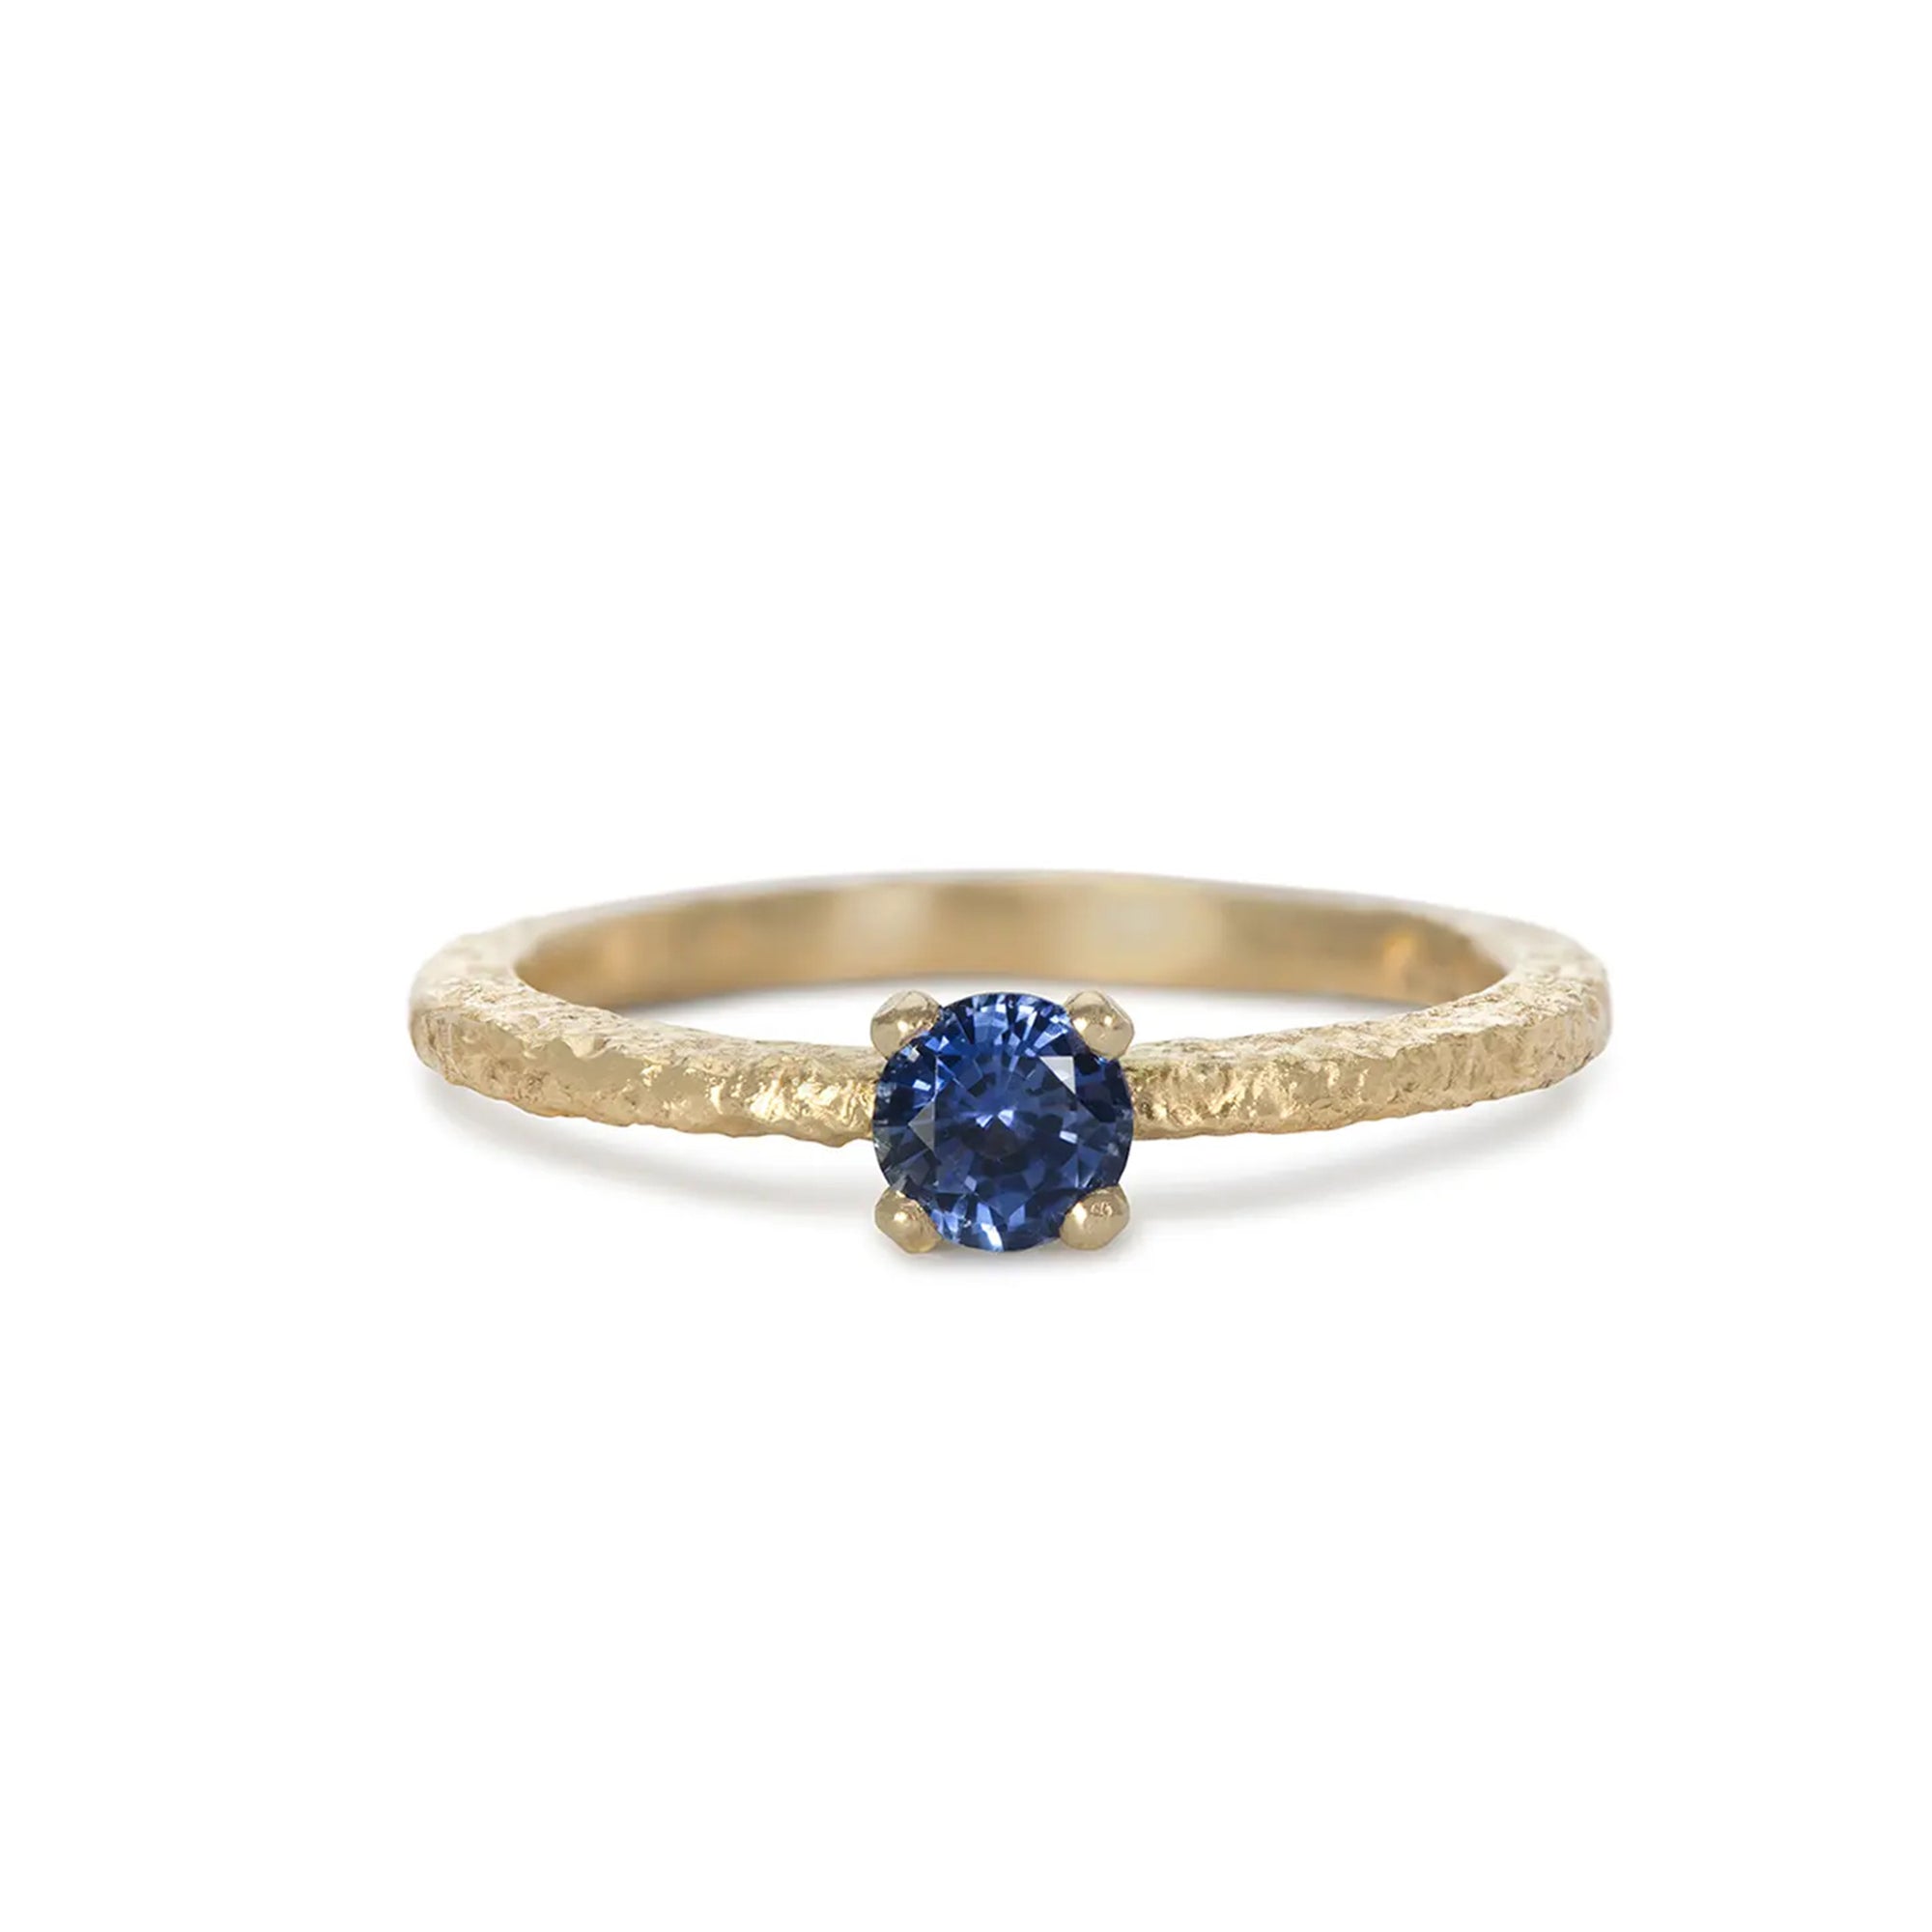    maya-selway-una-blue-sapphire-solitaire-ring